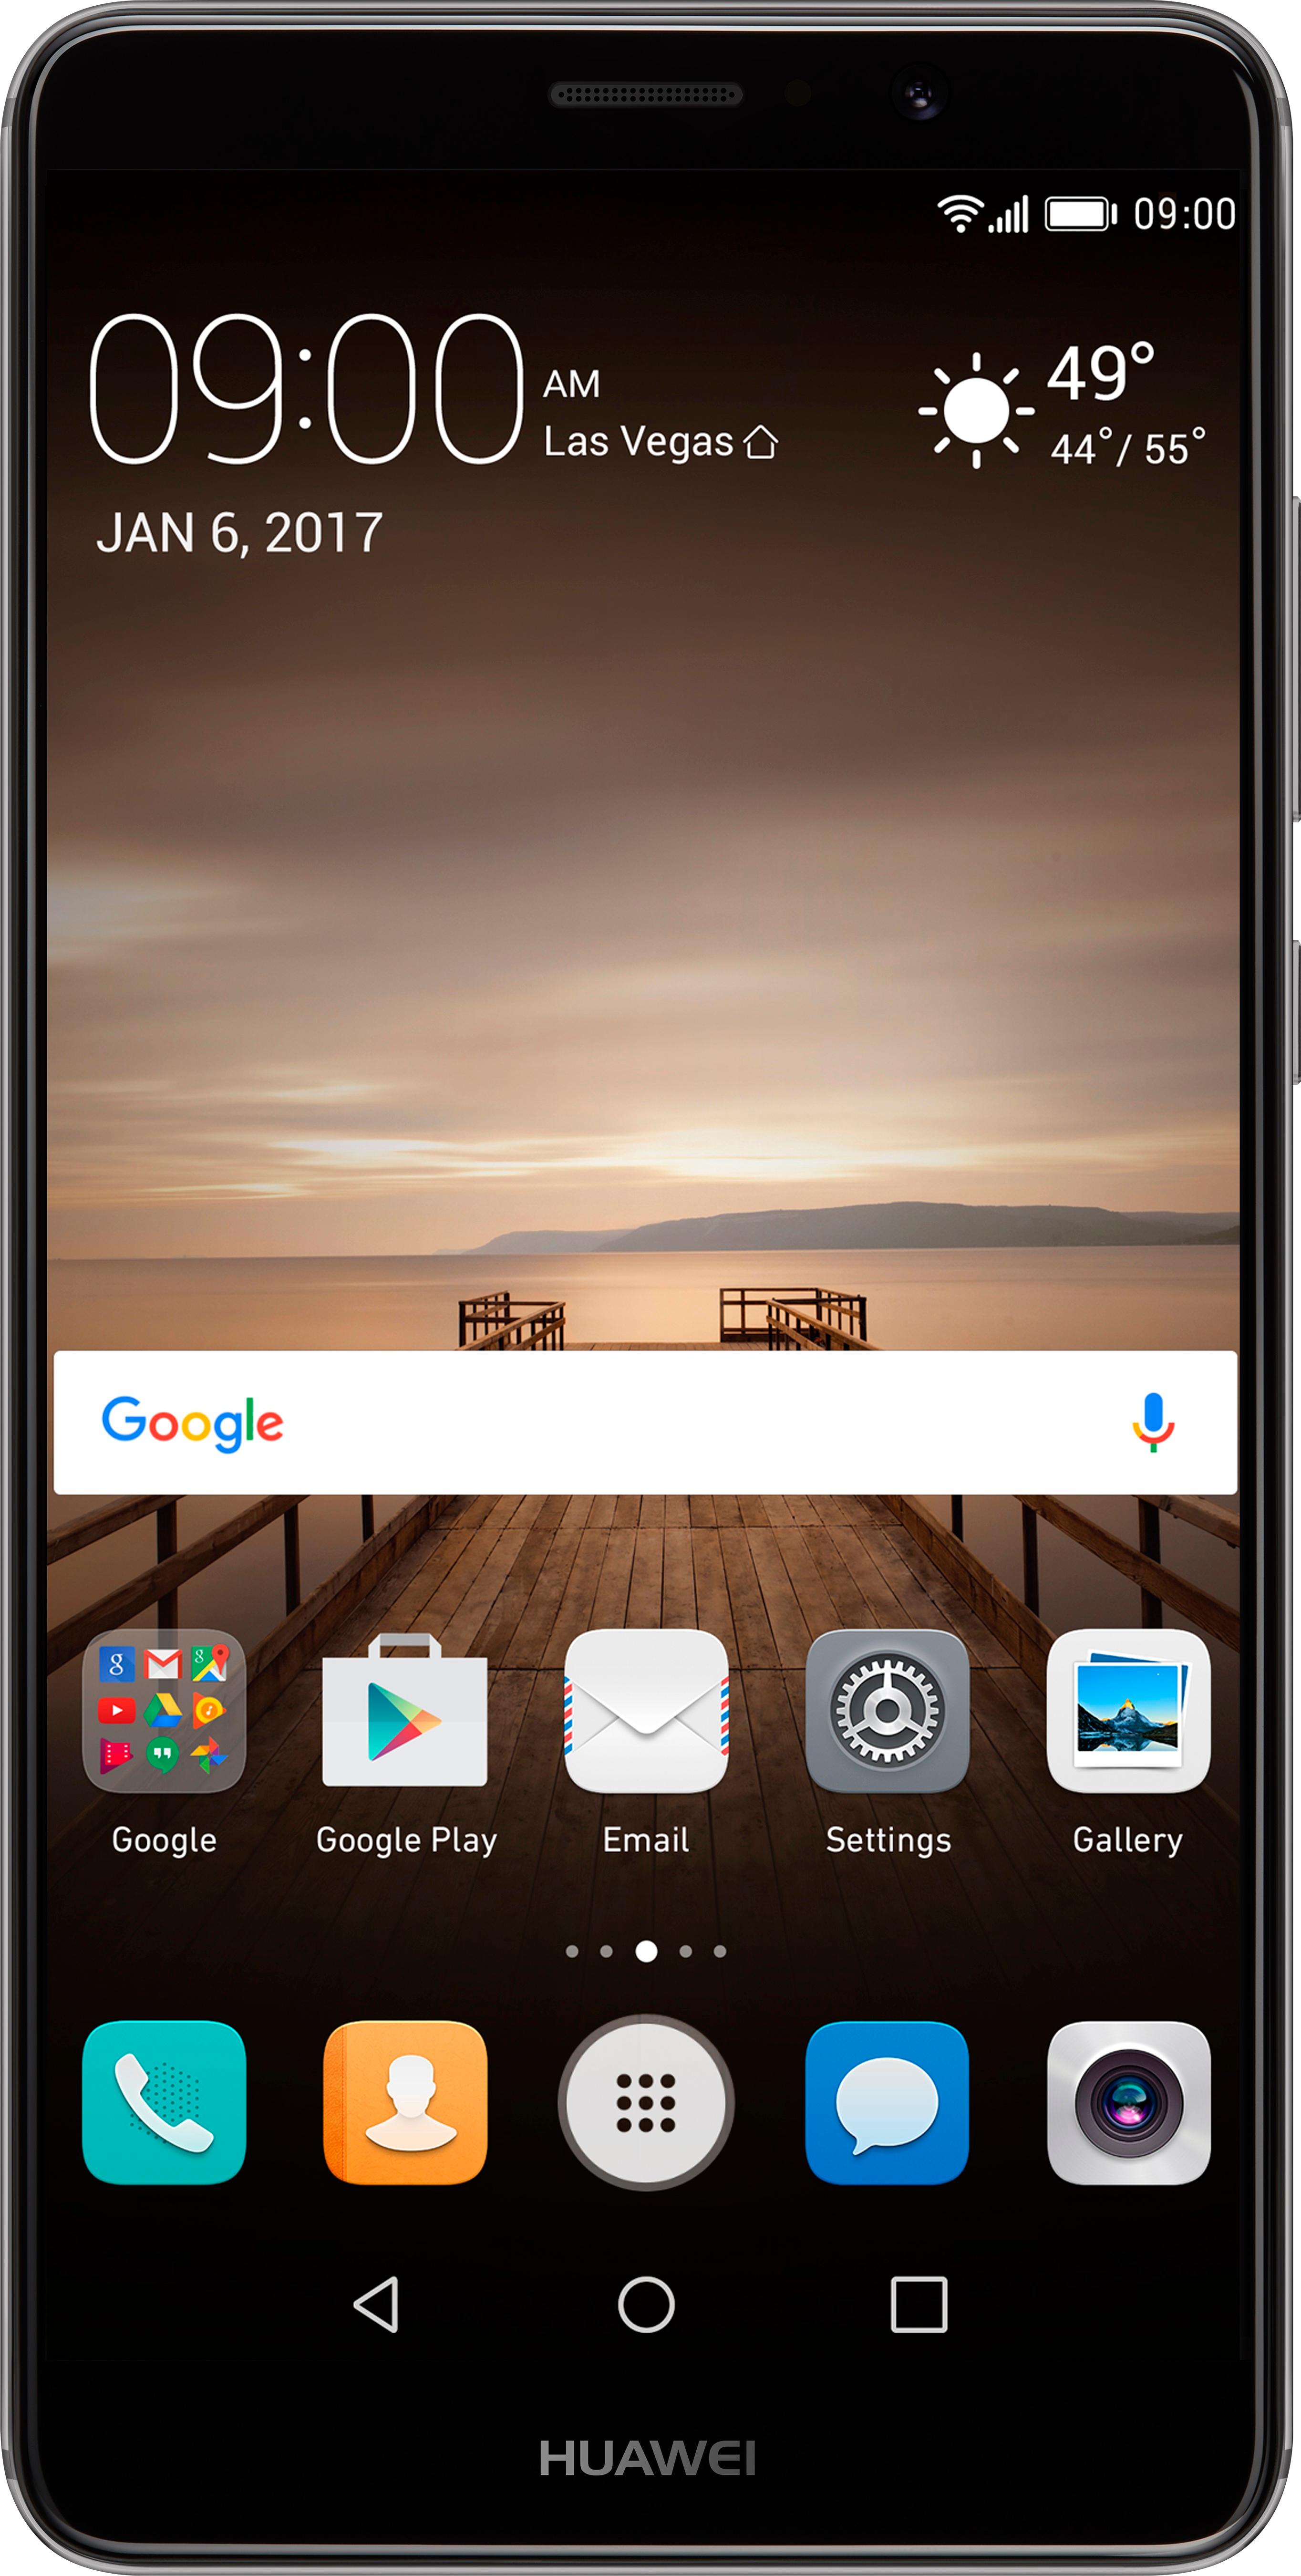 Huawei Refurbished Mate 9 4G LTE with 64GB Memory - Best Buy